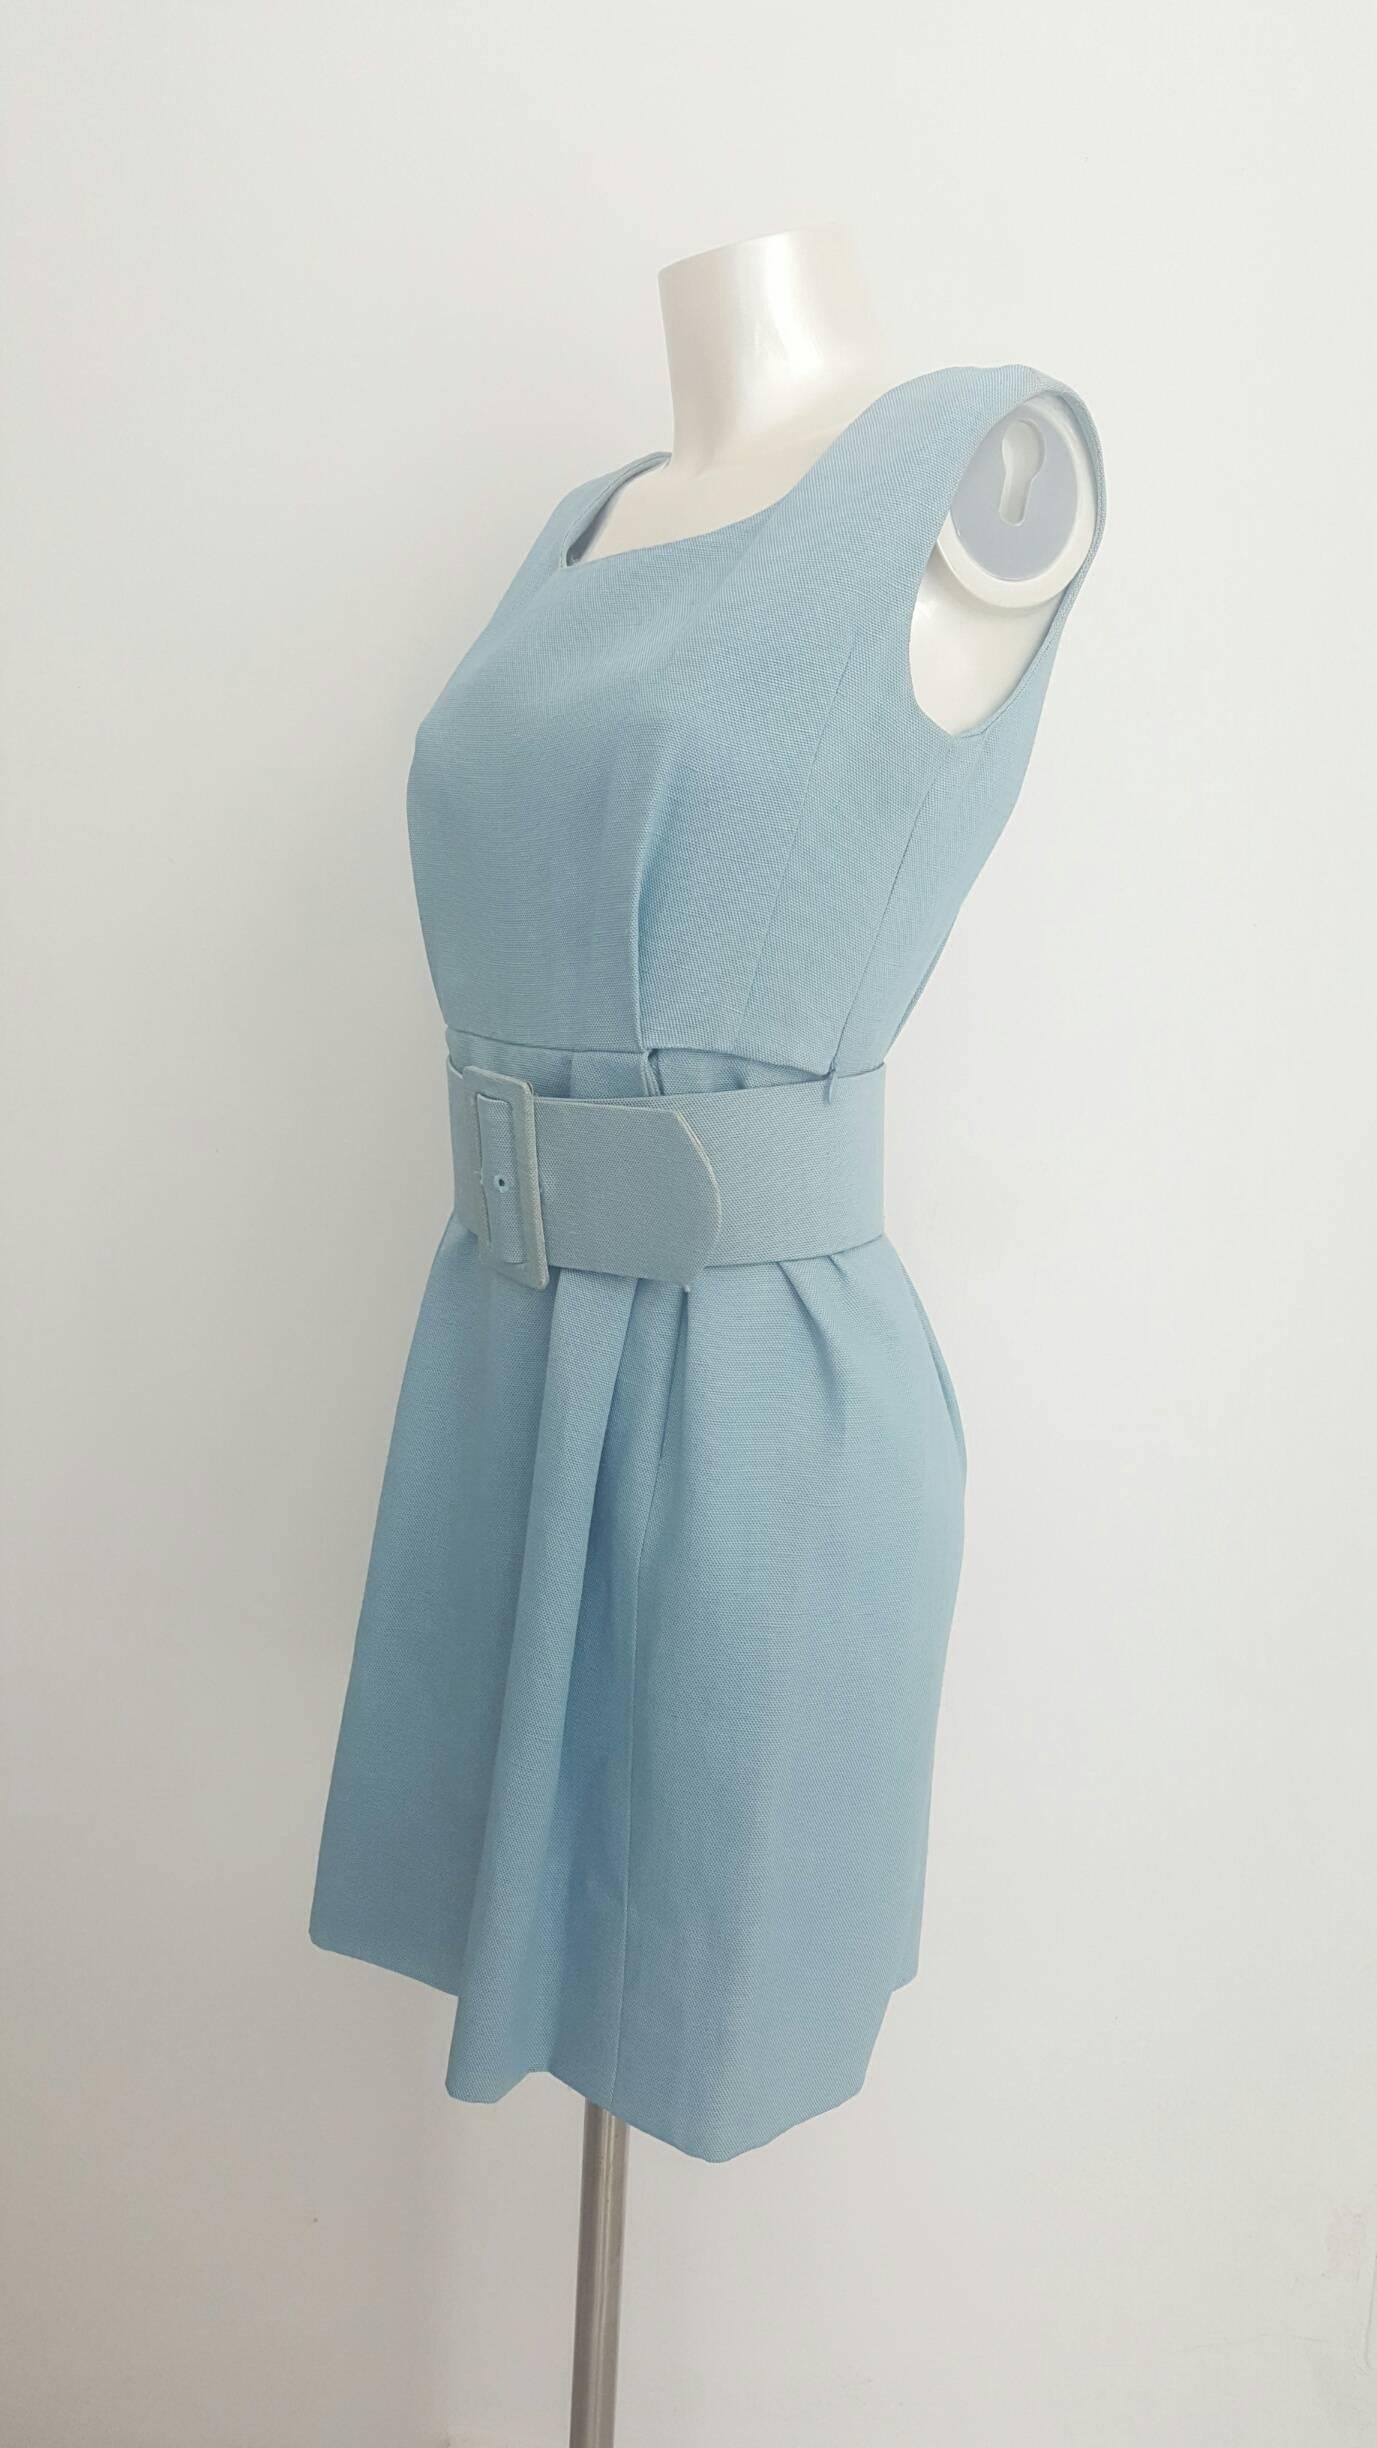 2008s Balenciaga Edition Light blu dress with belt is a reproduction of 1964
French size 38 which correspond to italian size range 42
still with tags